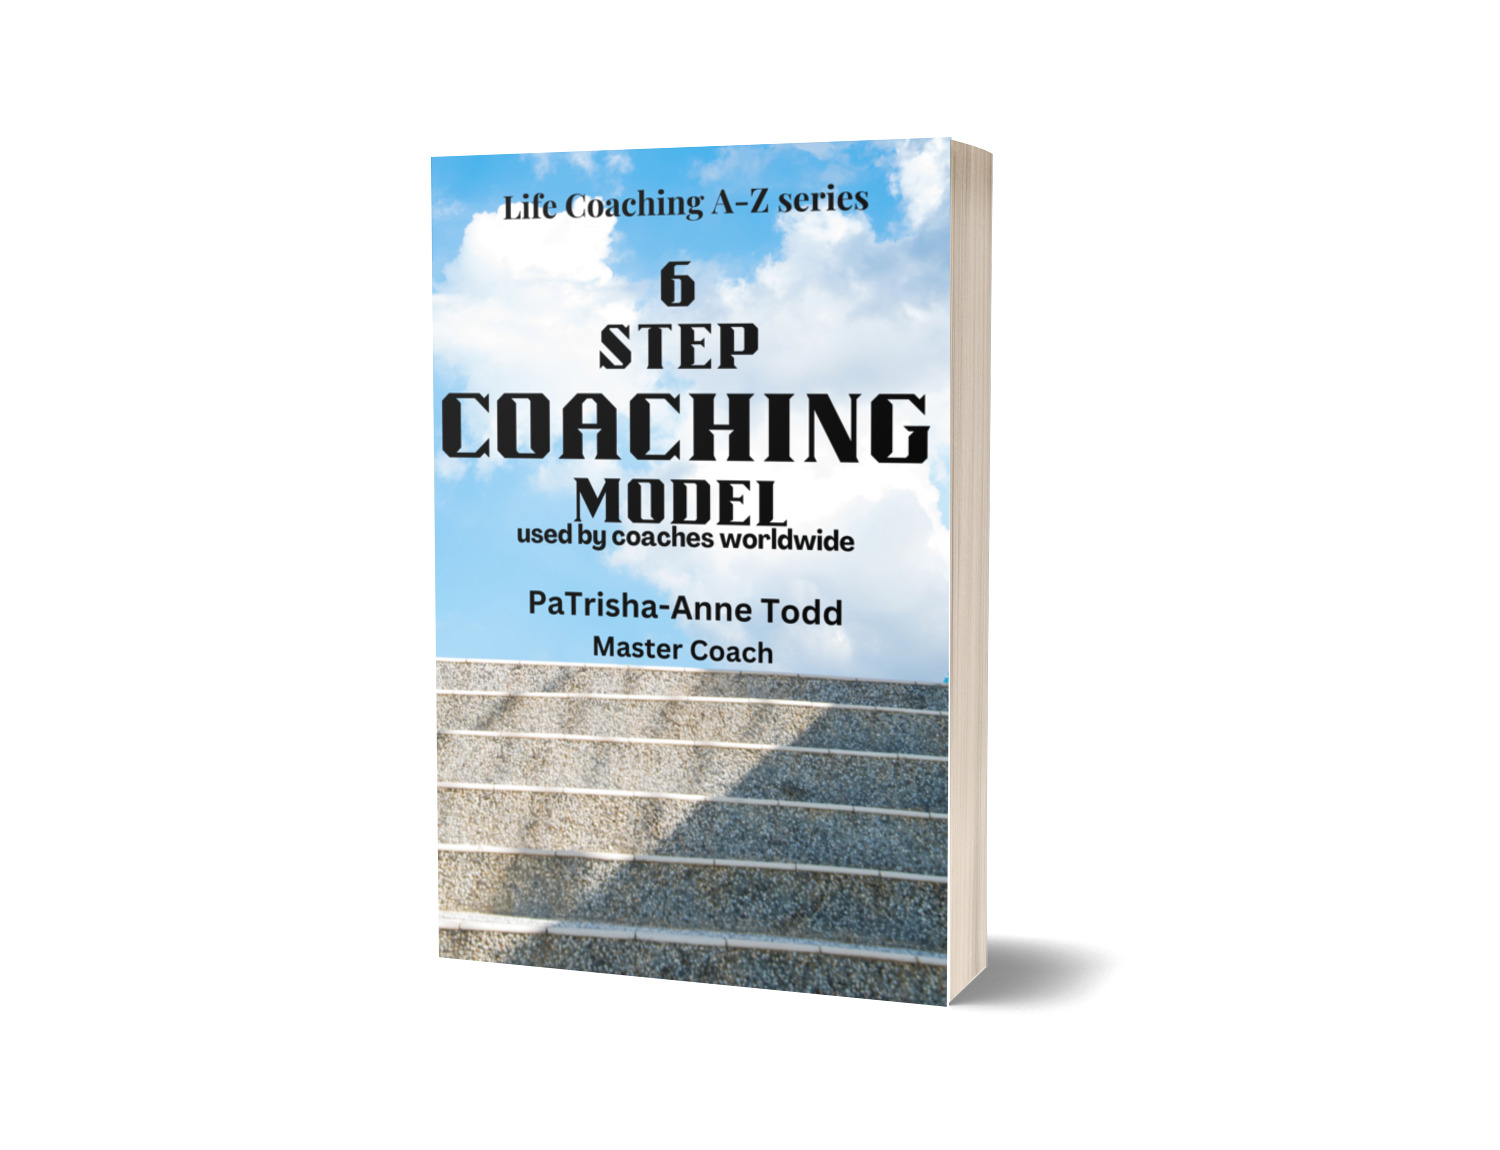 6 Step Coaching Model used by coaches worldwide - Become unstoppable!